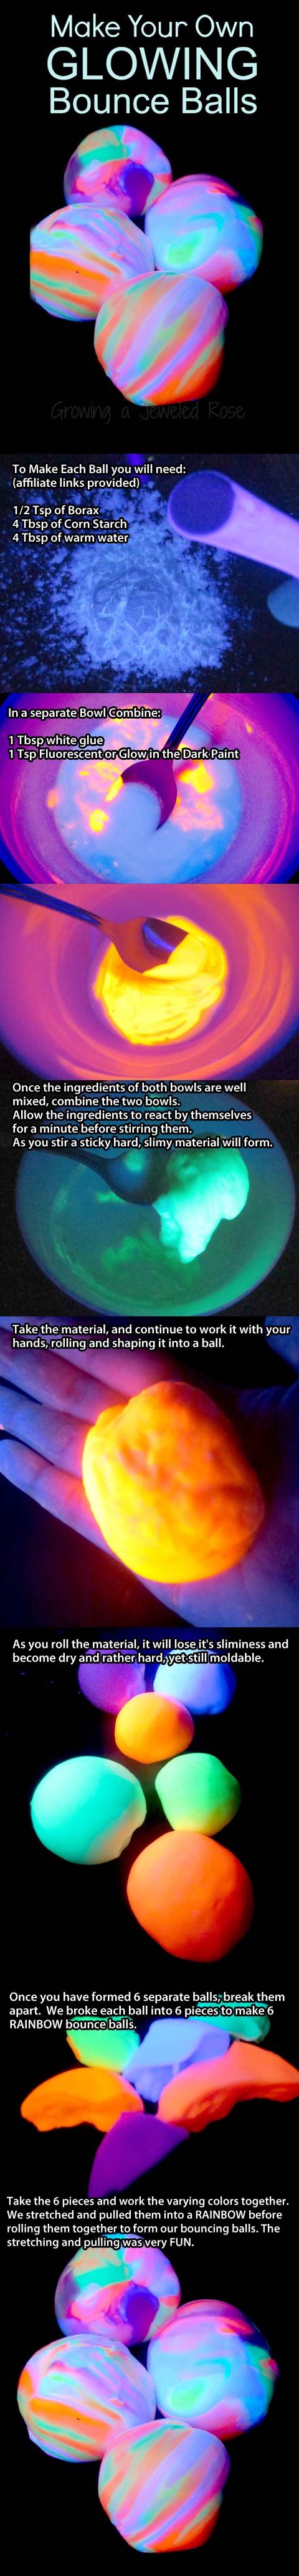 Make your own glowing bounce balls…